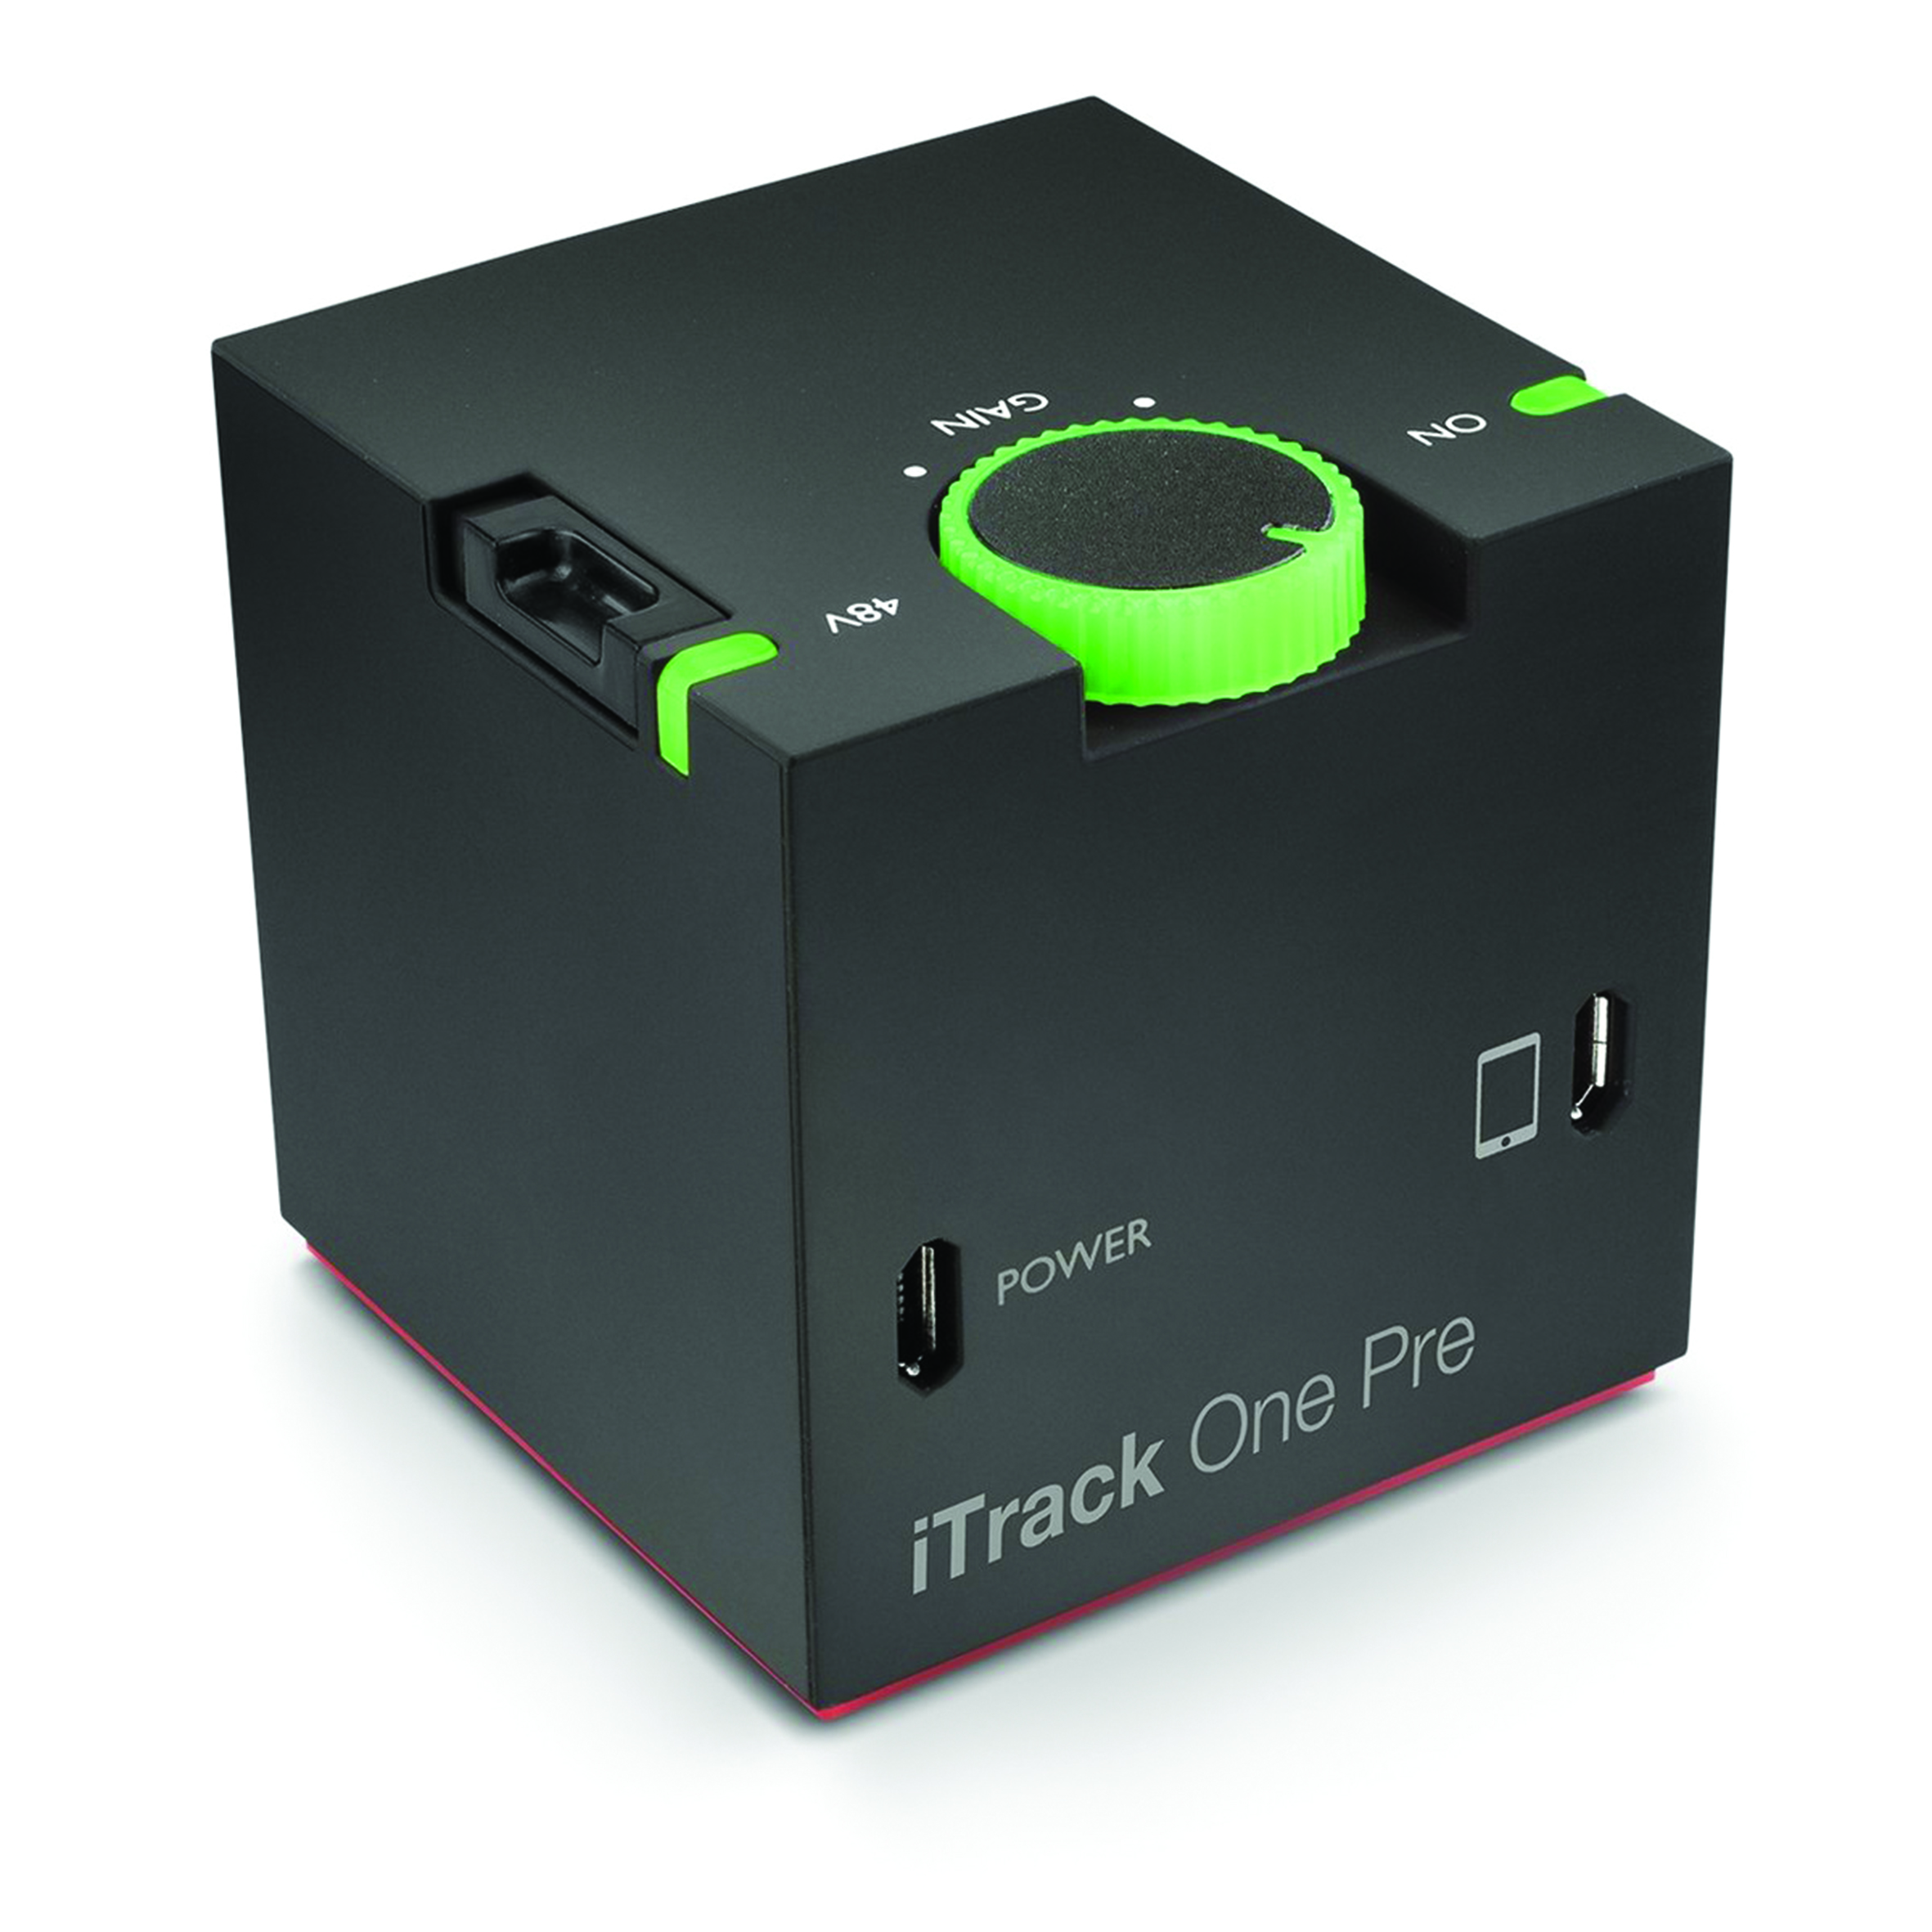 itrack one pre